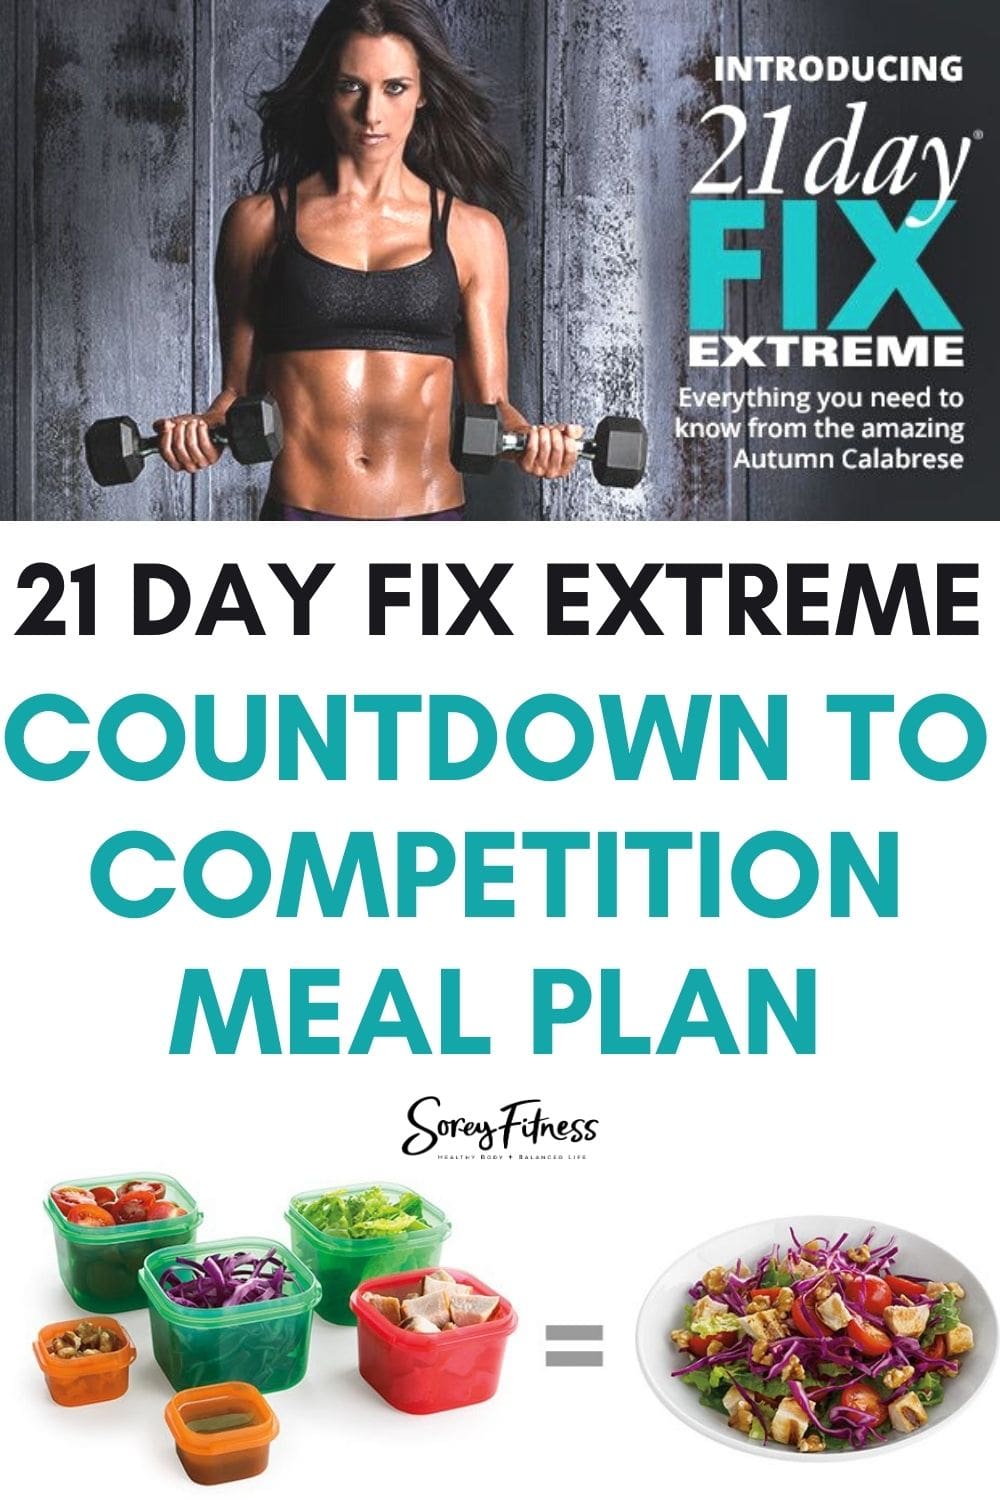 21 day fix extreme food plan